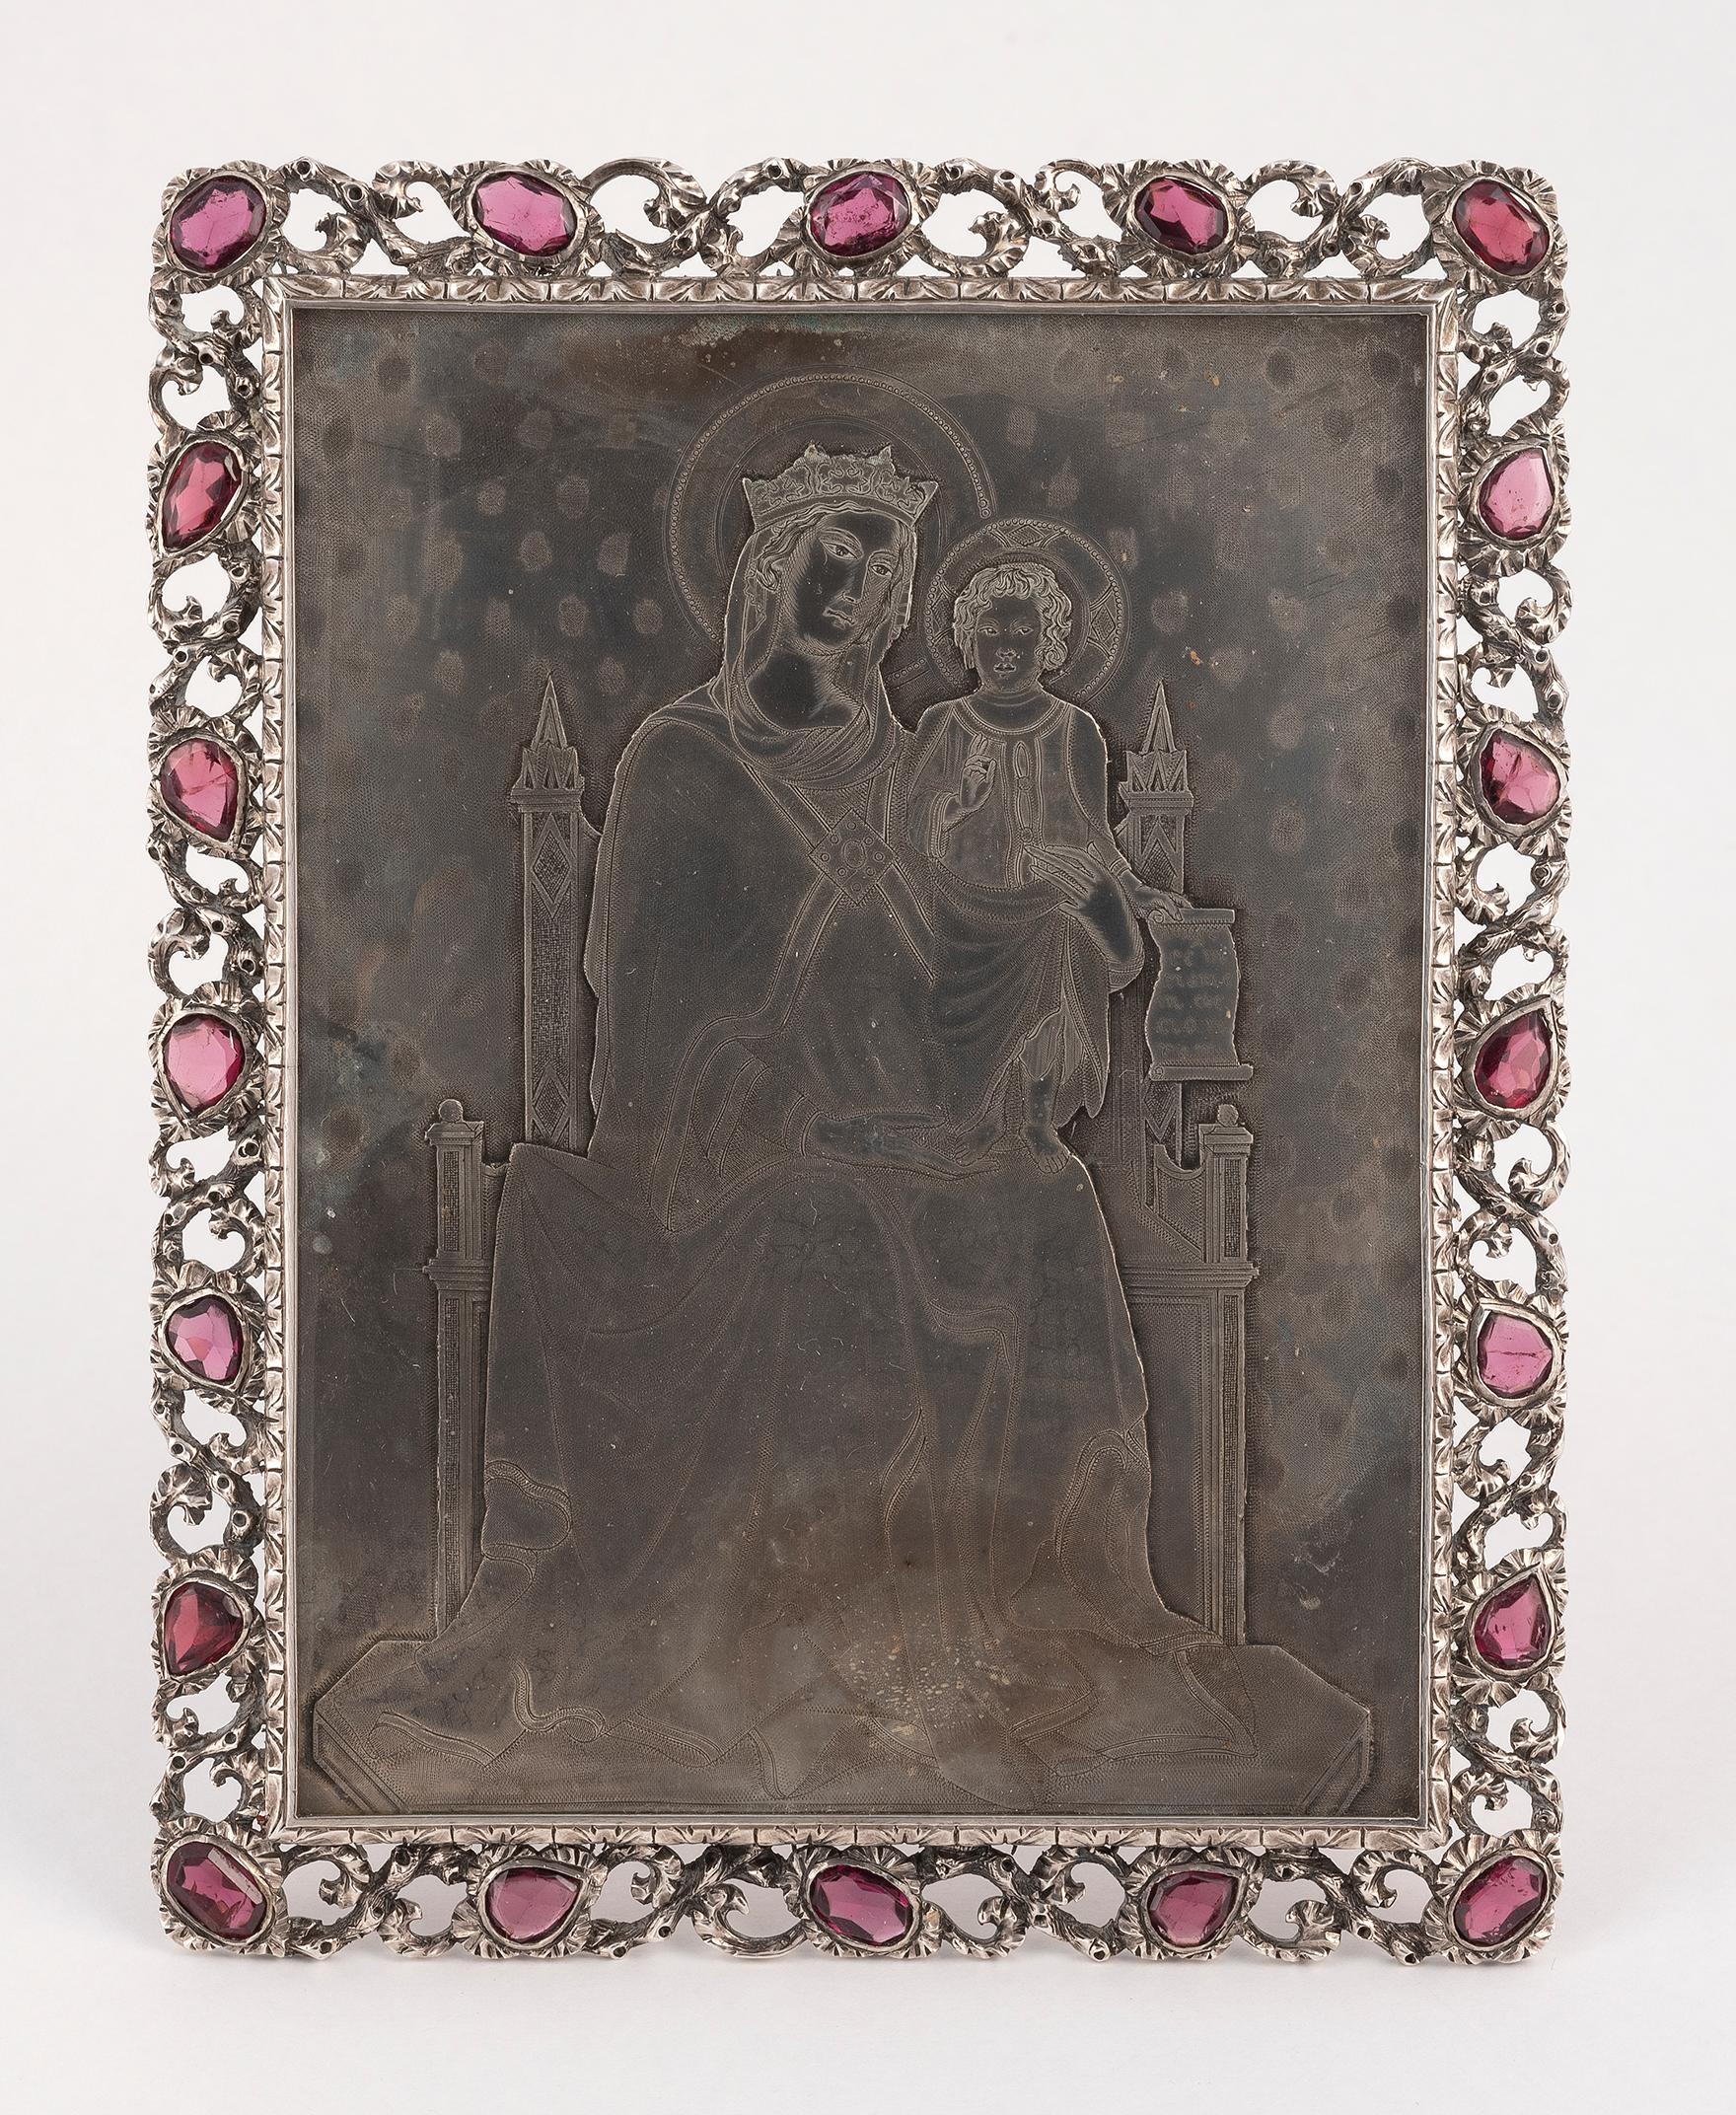 The frame oblong and with an openwork ruby-set border, containing a glazed engraved icon depicting the virgin and child.
Signed 'M. Buccellati Milano Firenze, with original leather box
Measures: High 10cm.